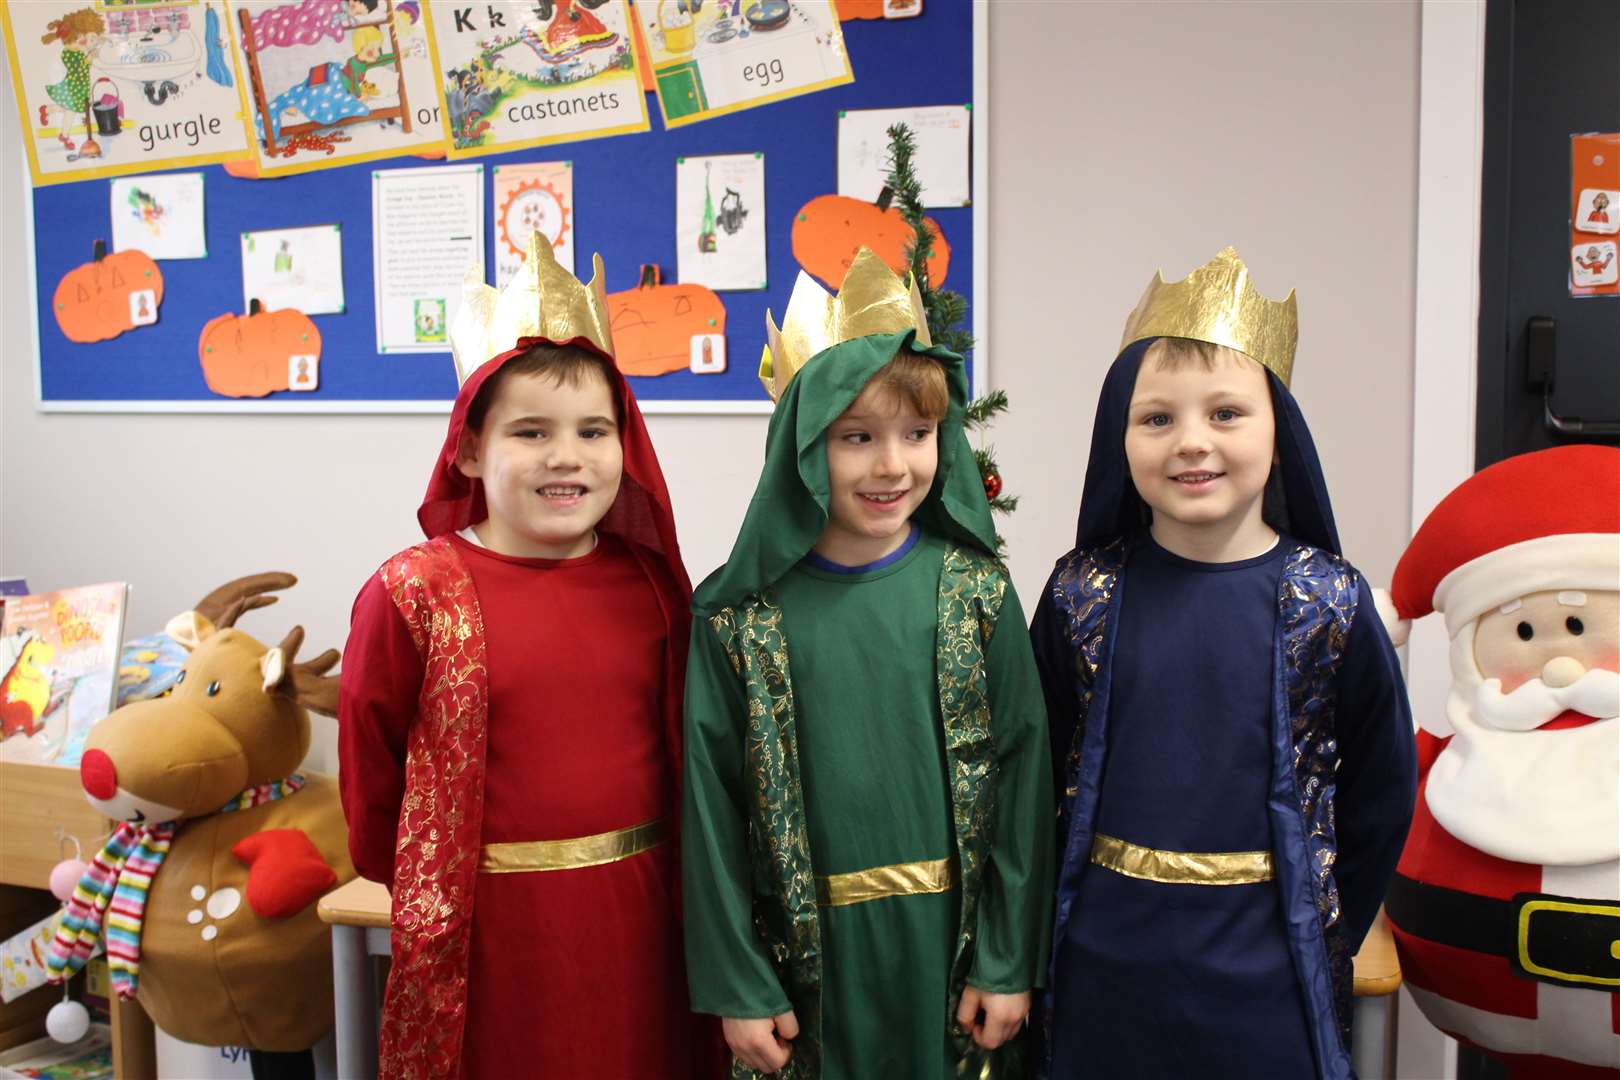 Primary 1 and 2 at Park Primary performed the Nativity of ‘Whoops-a-Daisy Angel’ last Wednesday which was recorded and shared with parents.